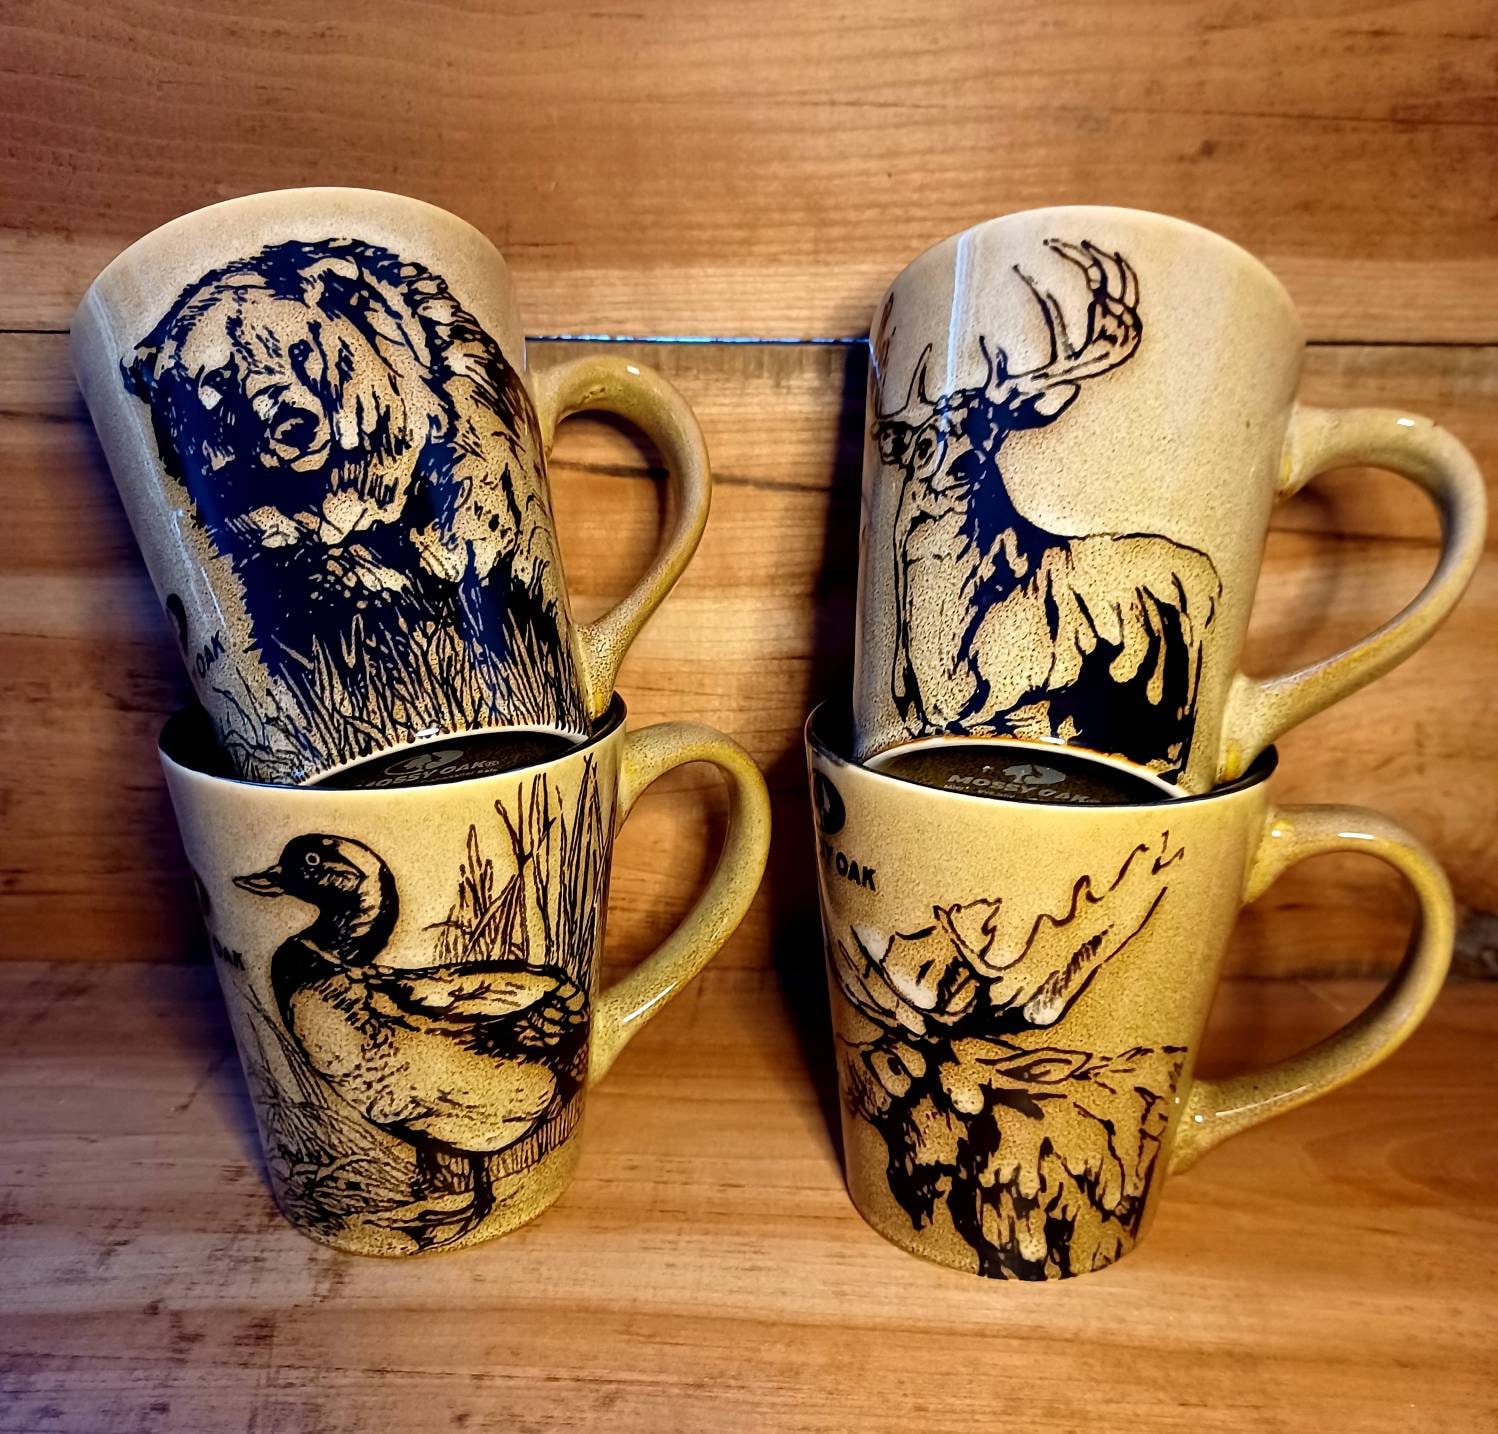 Mossy Oak Coffee Mugs Sold in Sets of 2 4 Available -  Denmark